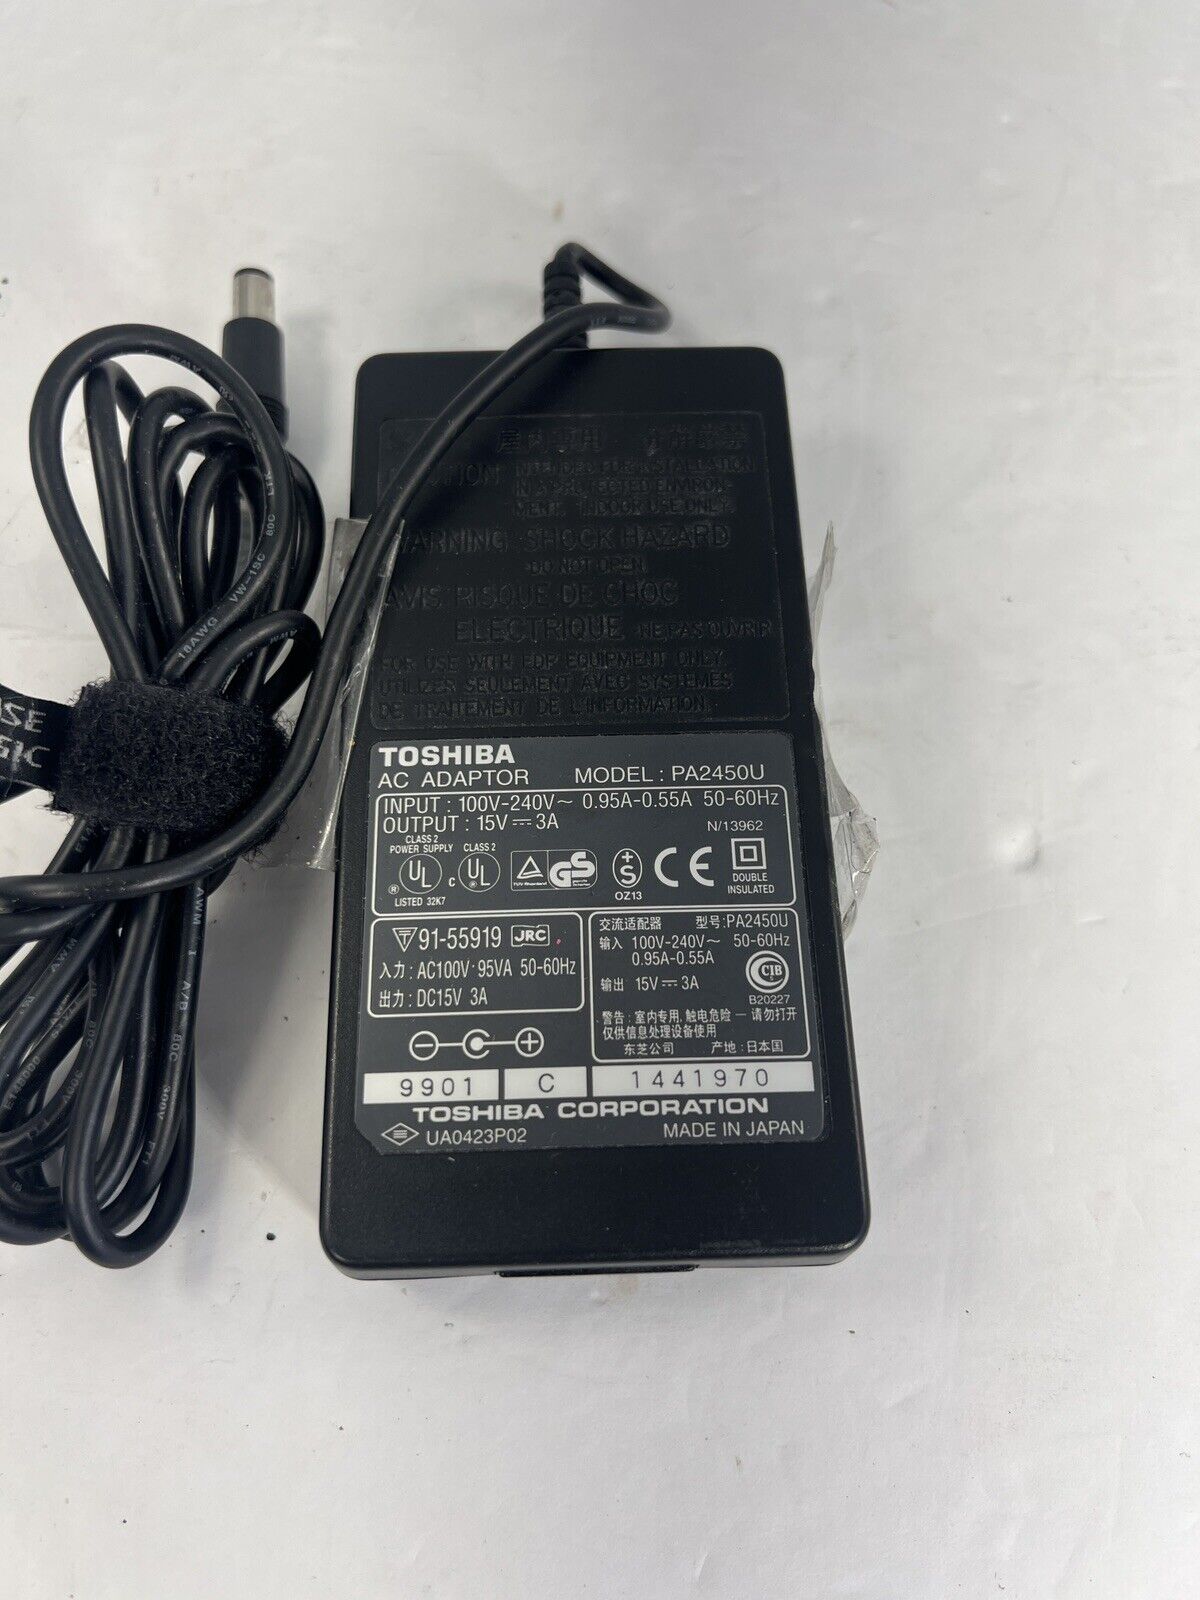 AUTHENTIC Toshiba PA2450U Charger / Power AC Adapter 100v-240v